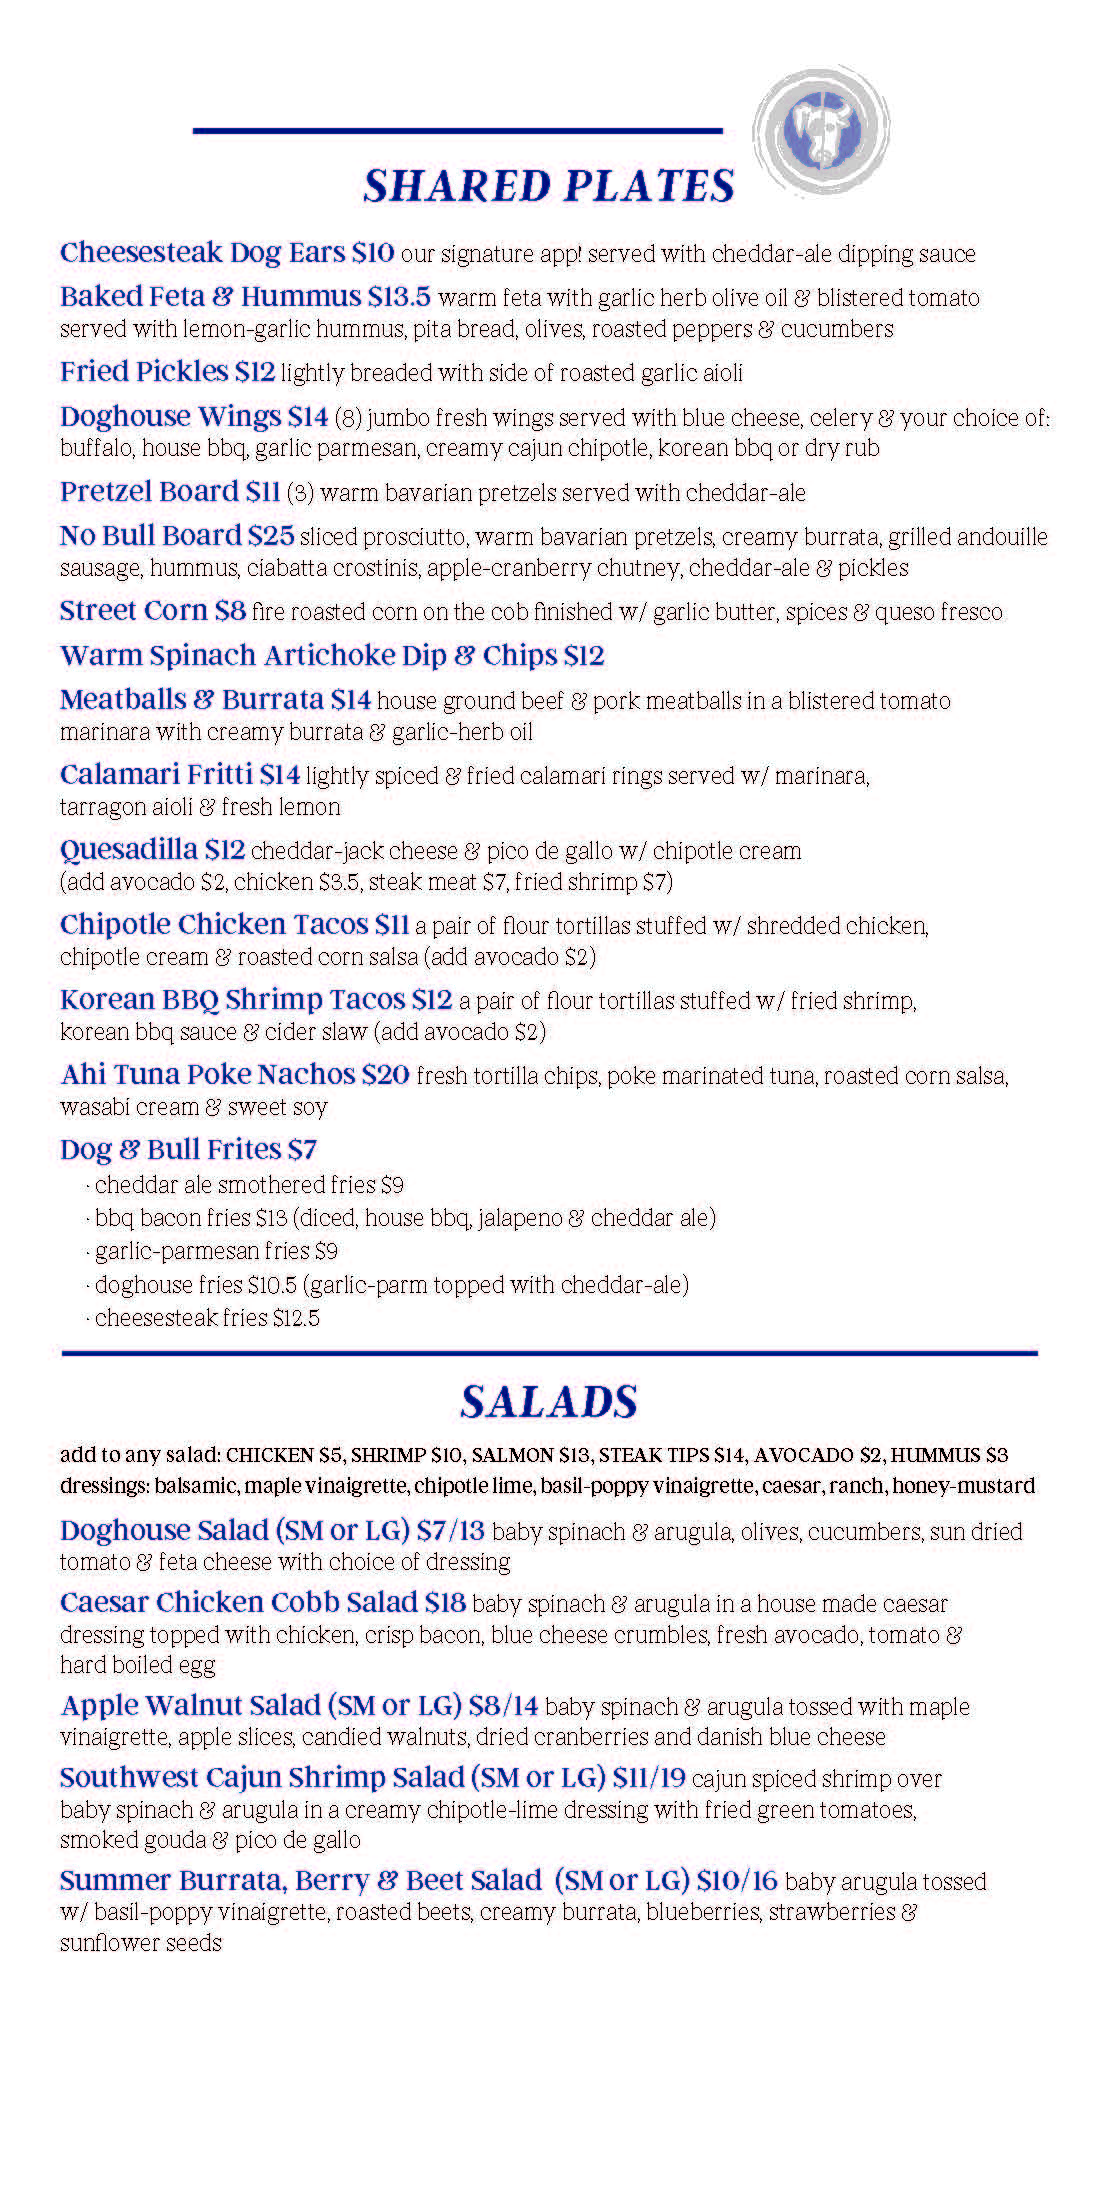 A menu titled "Shared Plates" lists various food items and their prices. Dishes include Cheesteak Dog Ears, Baked Pita & Hummus, Fried Pickles, Doghouse Wings, and more, with detailed descriptions for each.